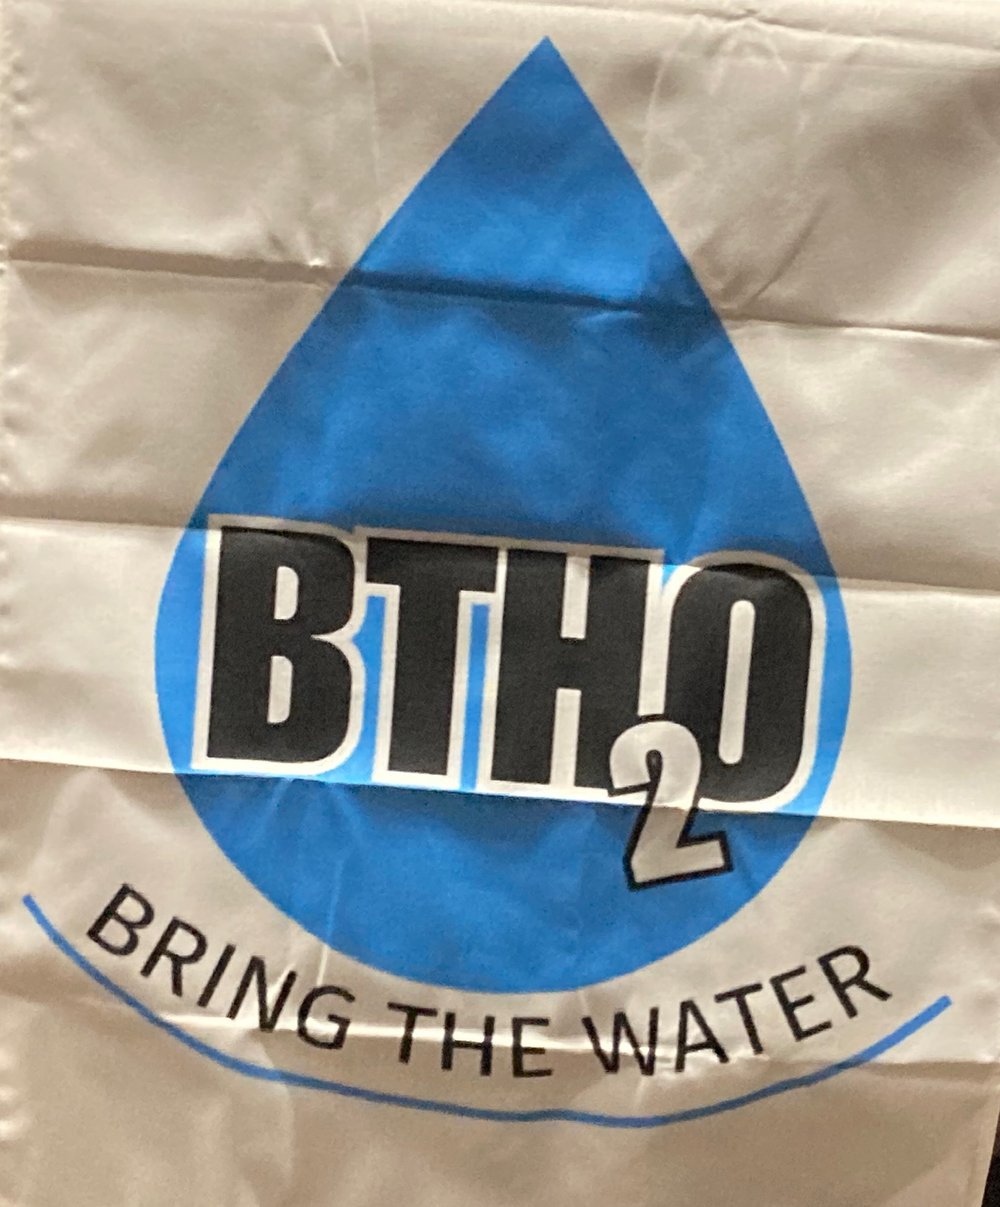 Bring the Water banner.jpeg